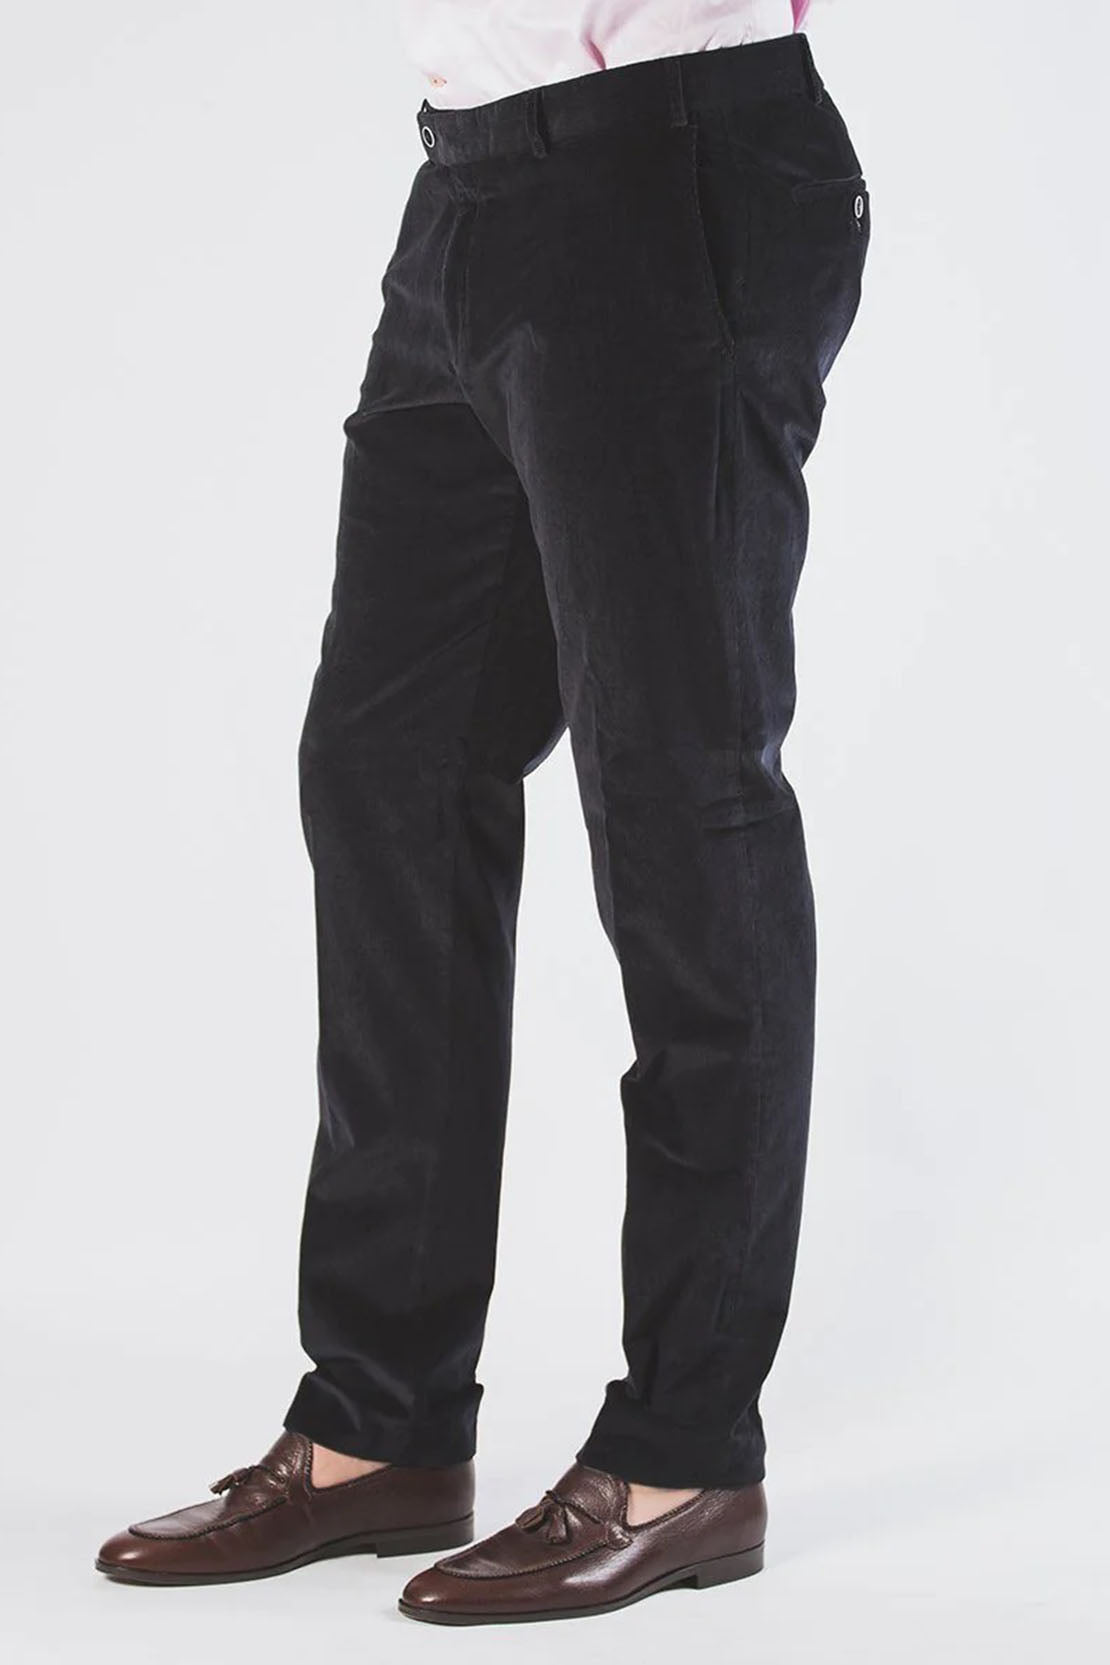 HILTL - TARENT Slim Fit Needle Corded Trousers in Navy Blue 74818/53600 41